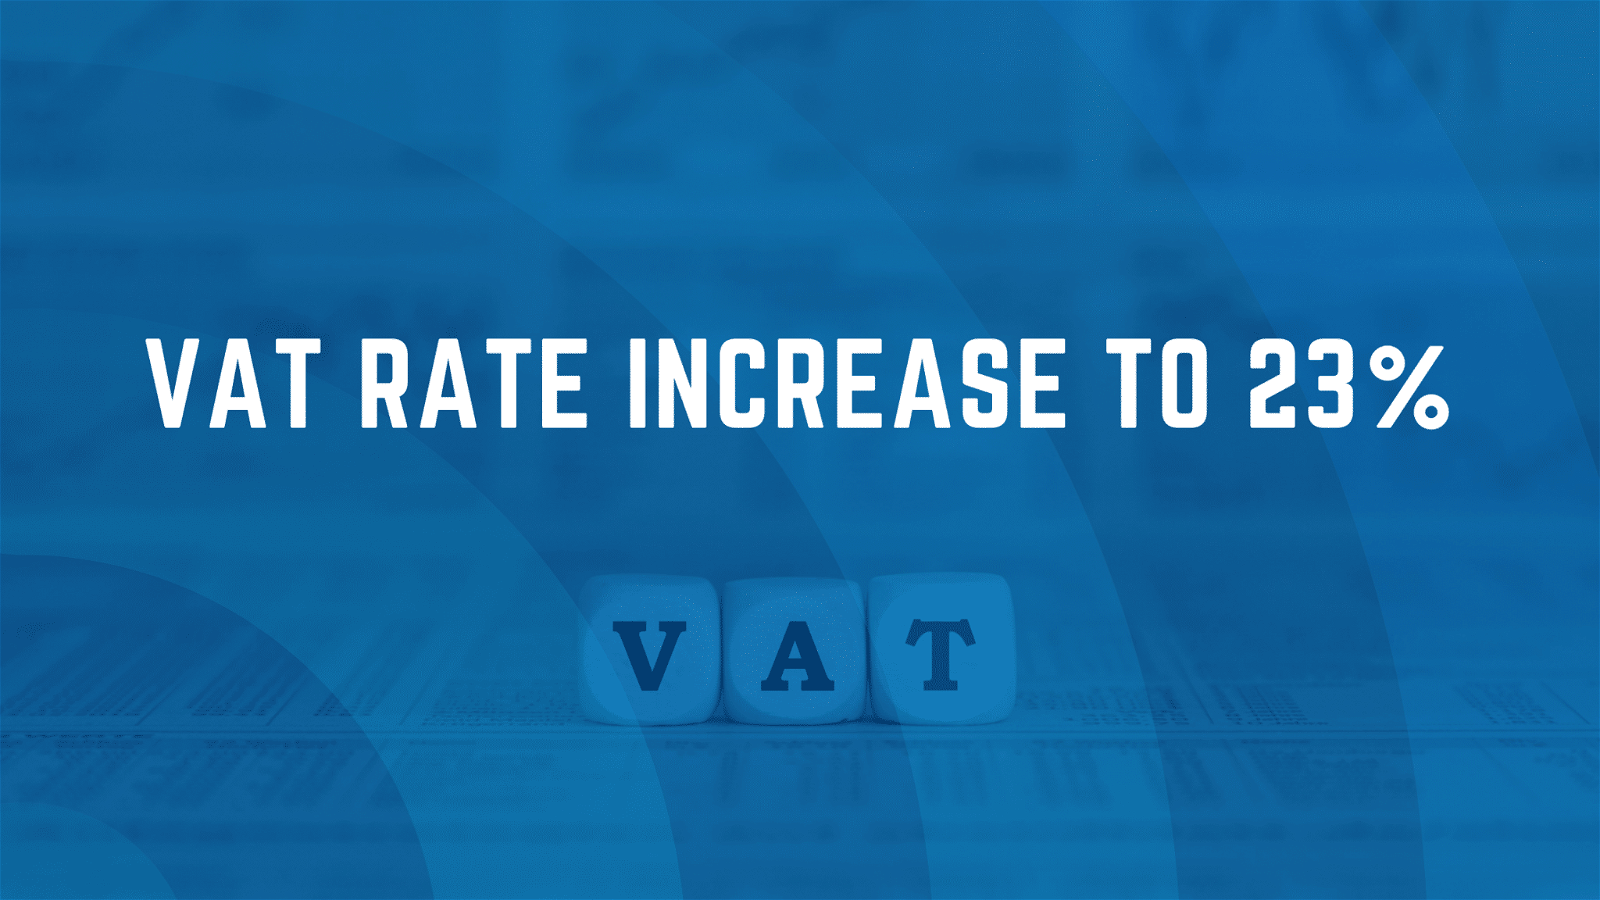 The image shows that the Value Added Tax (VAT) rate has been increased to 23%.